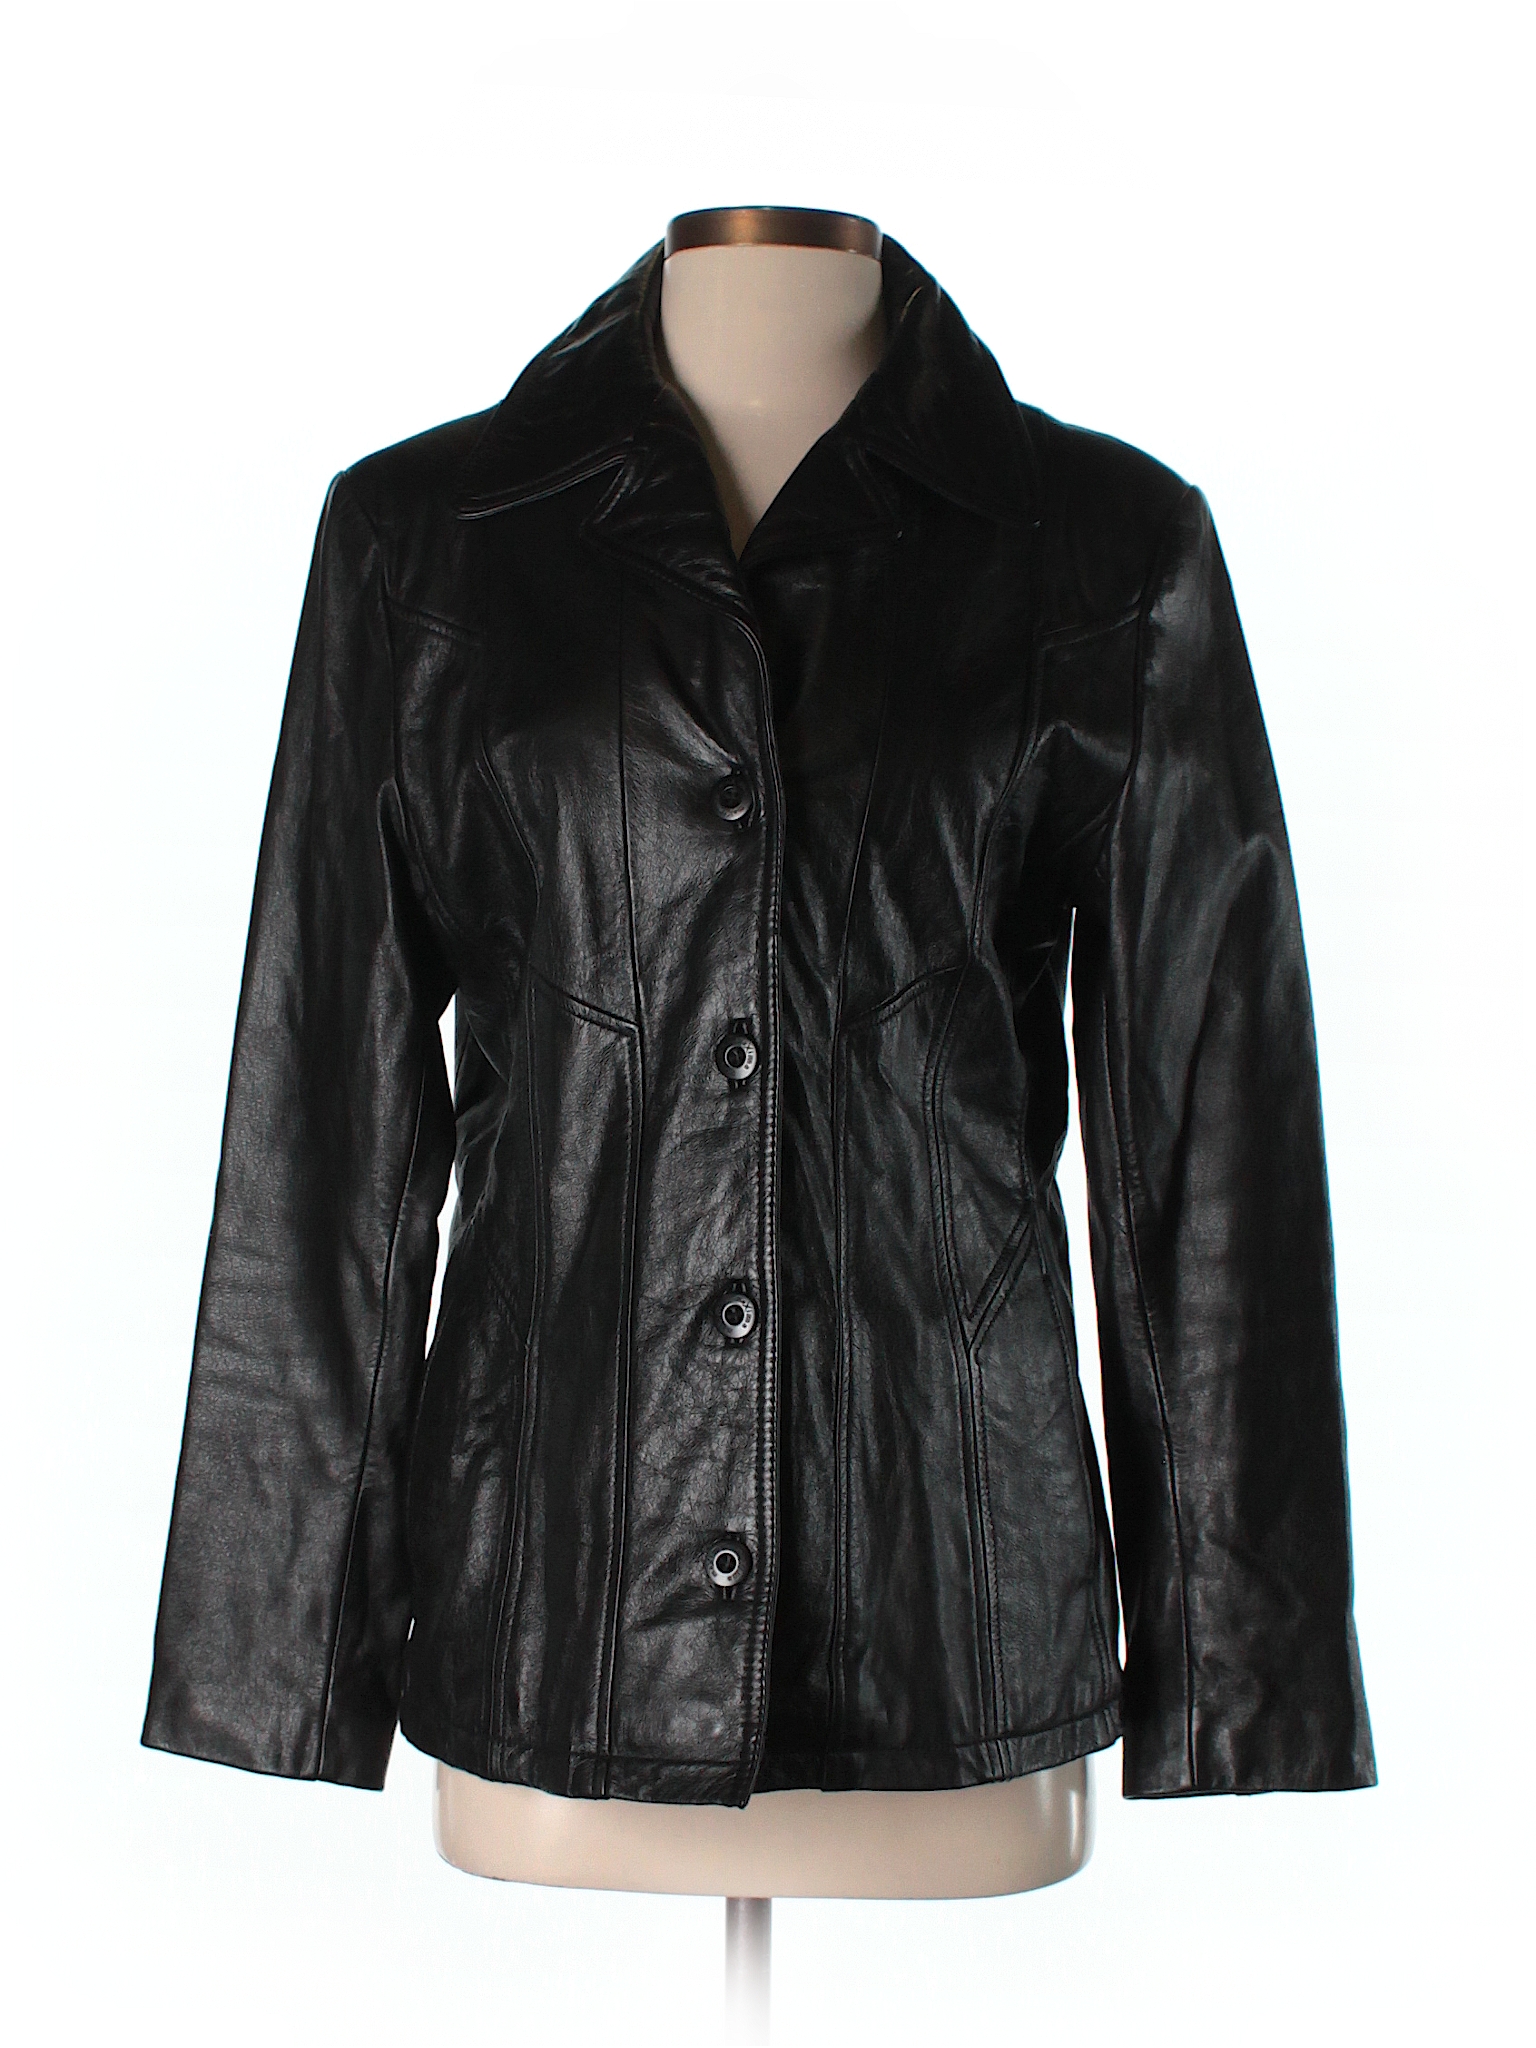 Wilsons Leather Maxima 100% Leather Solid Black Leather Jacket Size M - 84%  off | thredUP